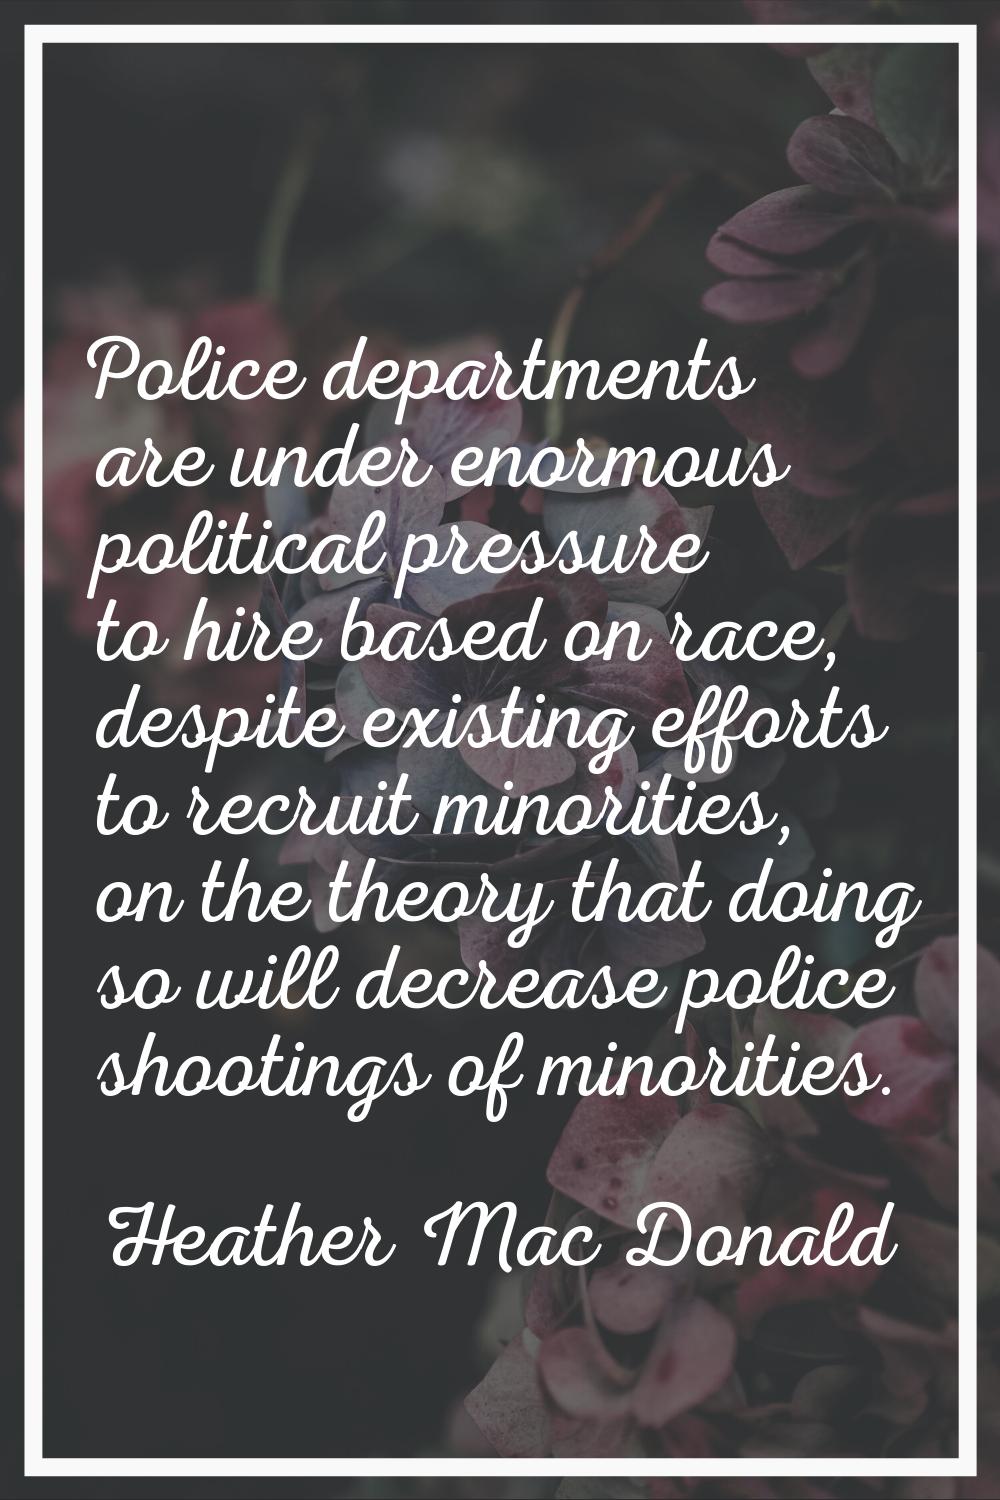 Police departments are under enormous political pressure to hire based on race, despite existing ef